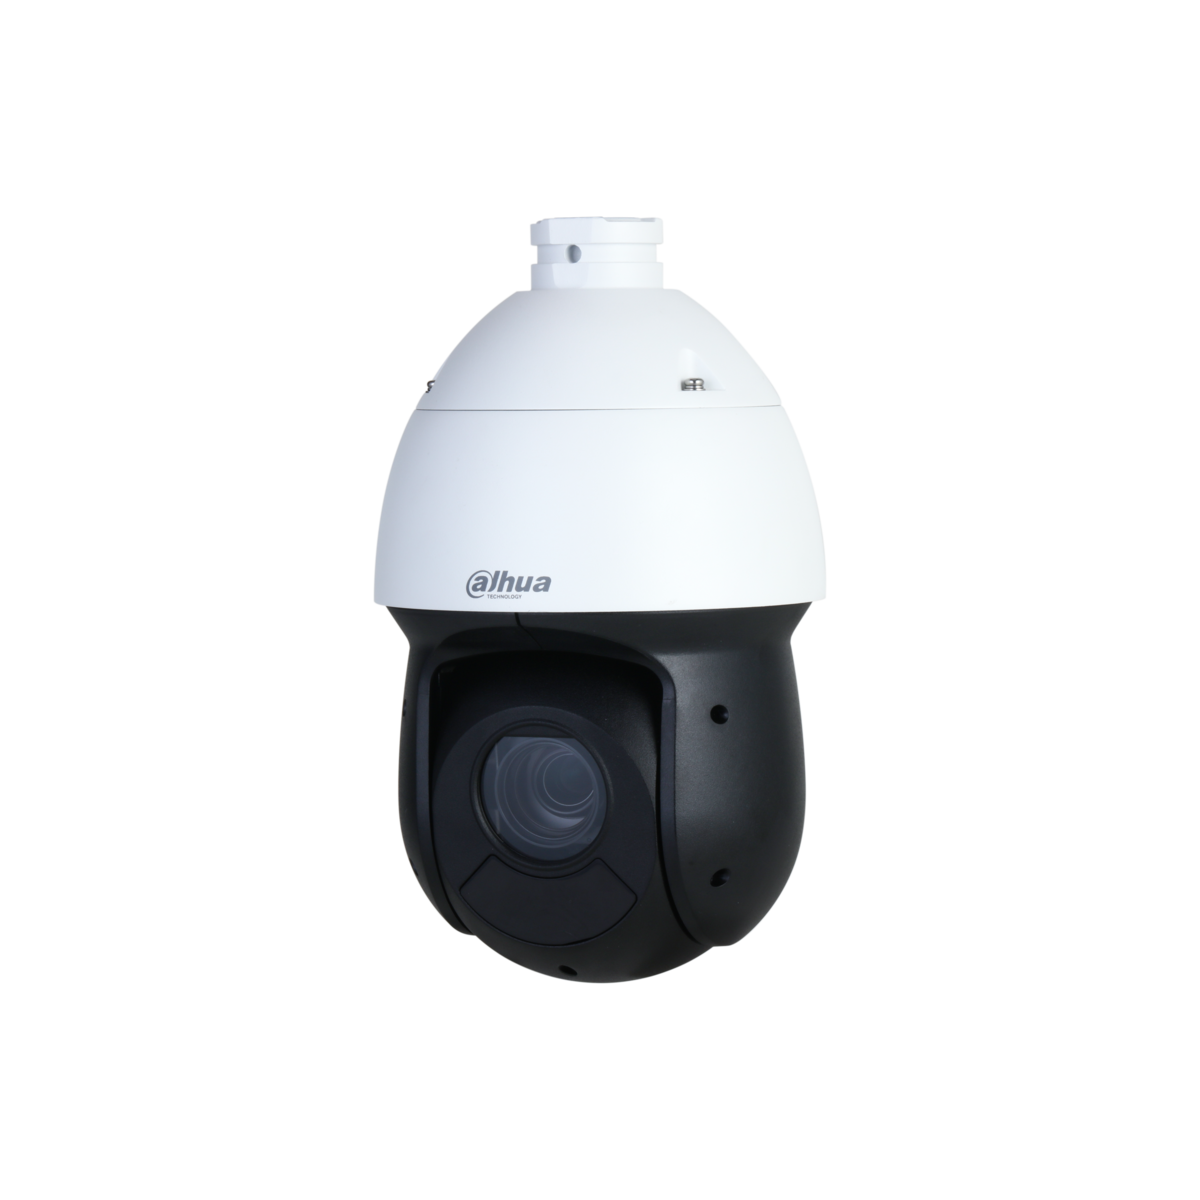 WIZSENSE SERIES IP CAMERA WHITE 2MP/1080P H.264/4+/5/5+ SPEED DOME PTZ 120 WDR PLASTIC/METAL 4.8-120MMMOTORISED LENS 25X ZOOM STARLIGHT IR 100M POE IP66 WITHOUT MIC AUDIO IN AUDIO OUT 2 x ALARM IN 1 x ALARM OUT SUPPORT UP TO 512GB SD 12VDC